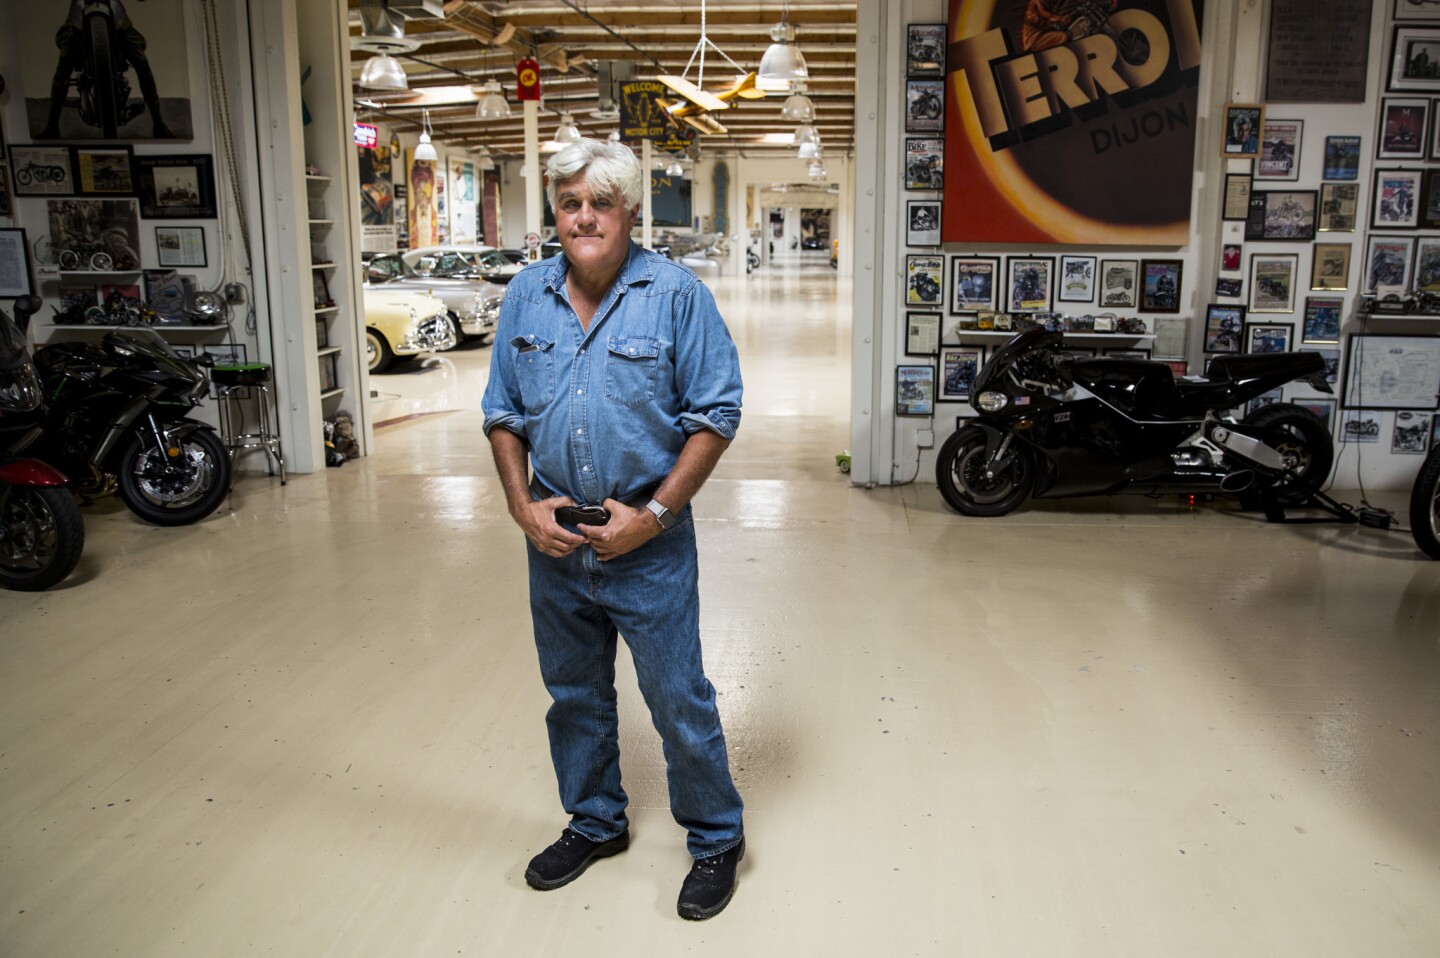 Comedian and car aficionado Jay Leno pauses inside his Big Dog Garage, which houses an extensive, collection of historical cars and motorcycles, in Burbank, Calif.